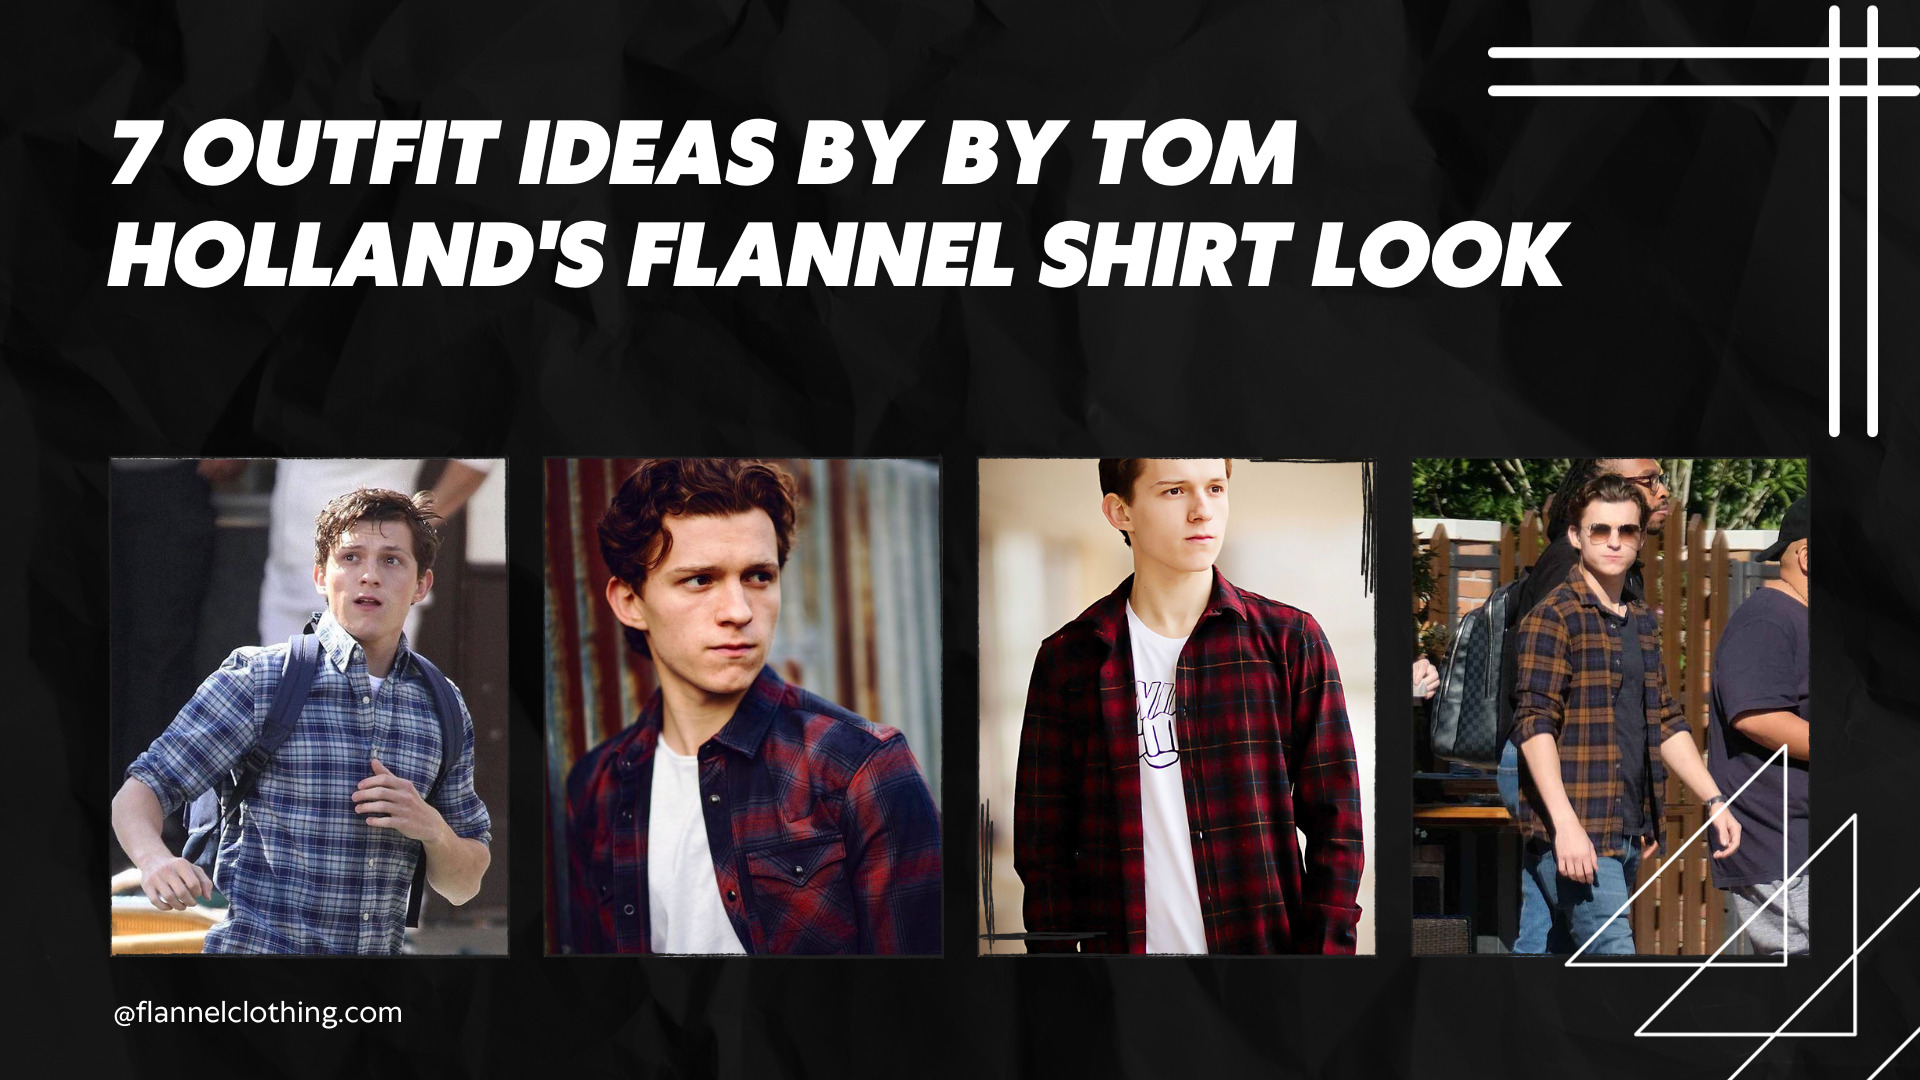 7 Outfit Ideas By Tom Holland's Flannel Shirt Look